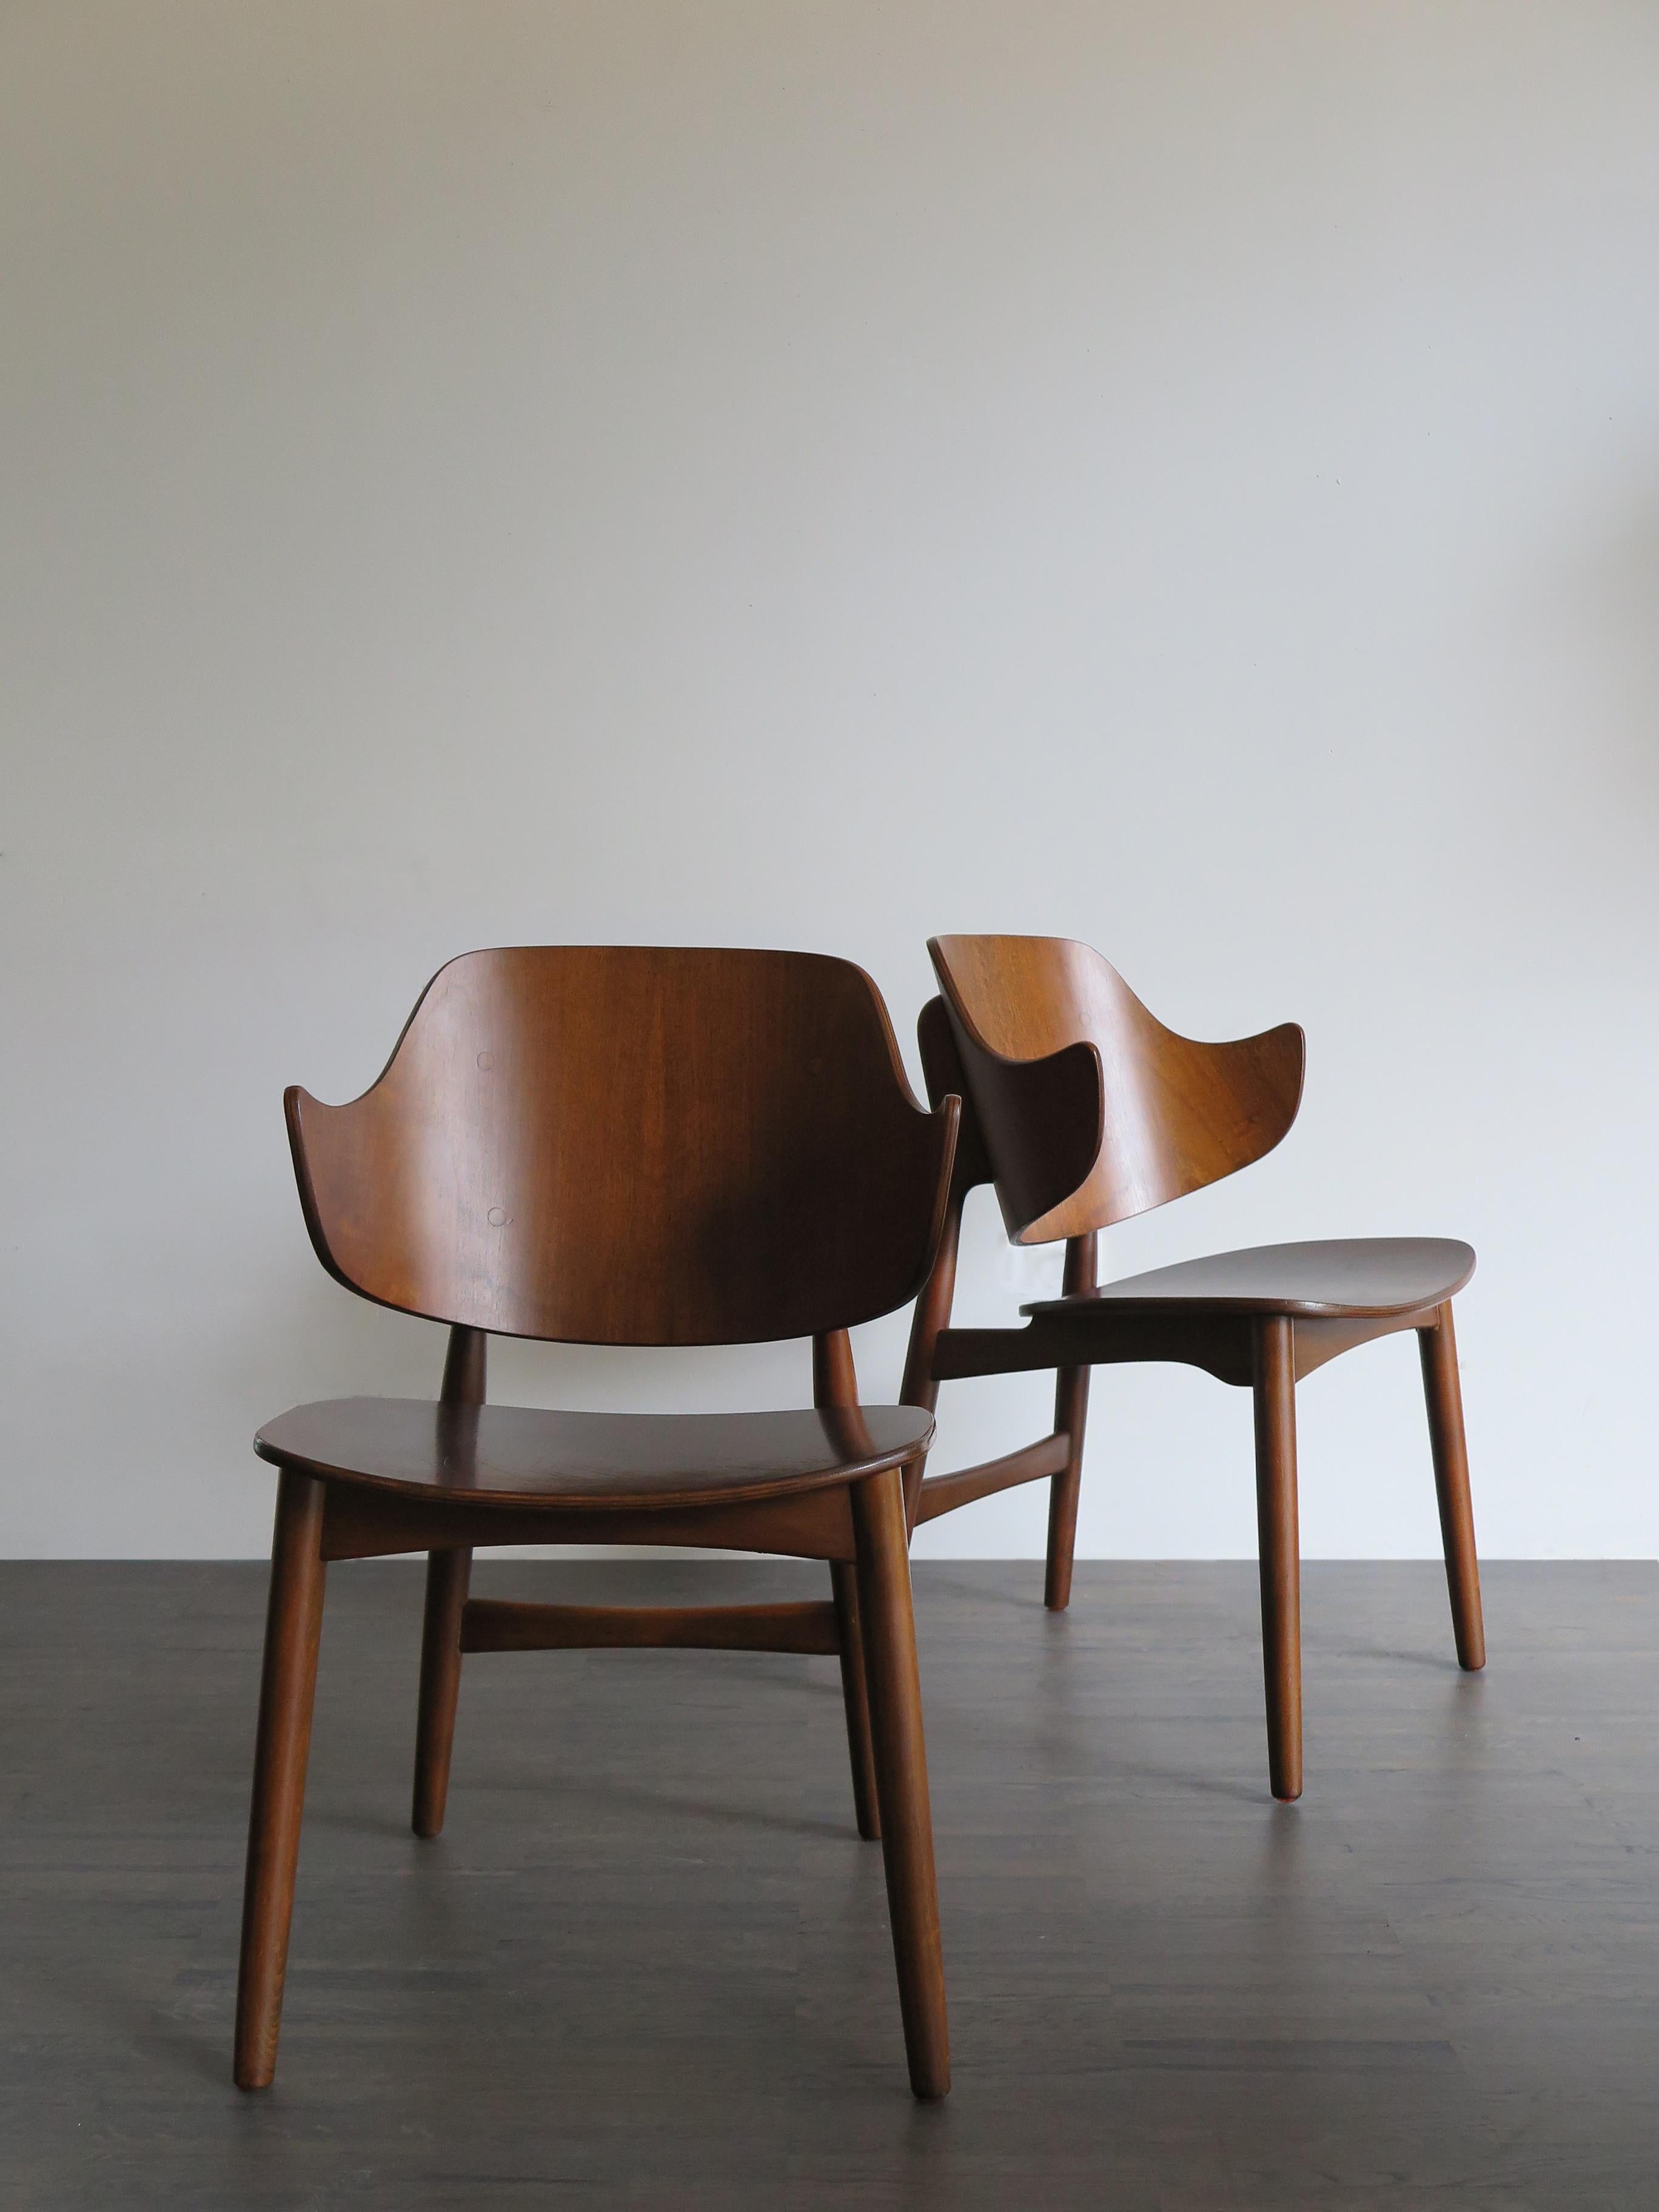 Set of two Scandinavian chairs armchairs designed by Danish Jens Hjorth for Randers Møbelfabrik, curved teak wood, very good vintage condition with wonderful patina, circa 1950s
Please note that the chairs are original of the period and thus shows